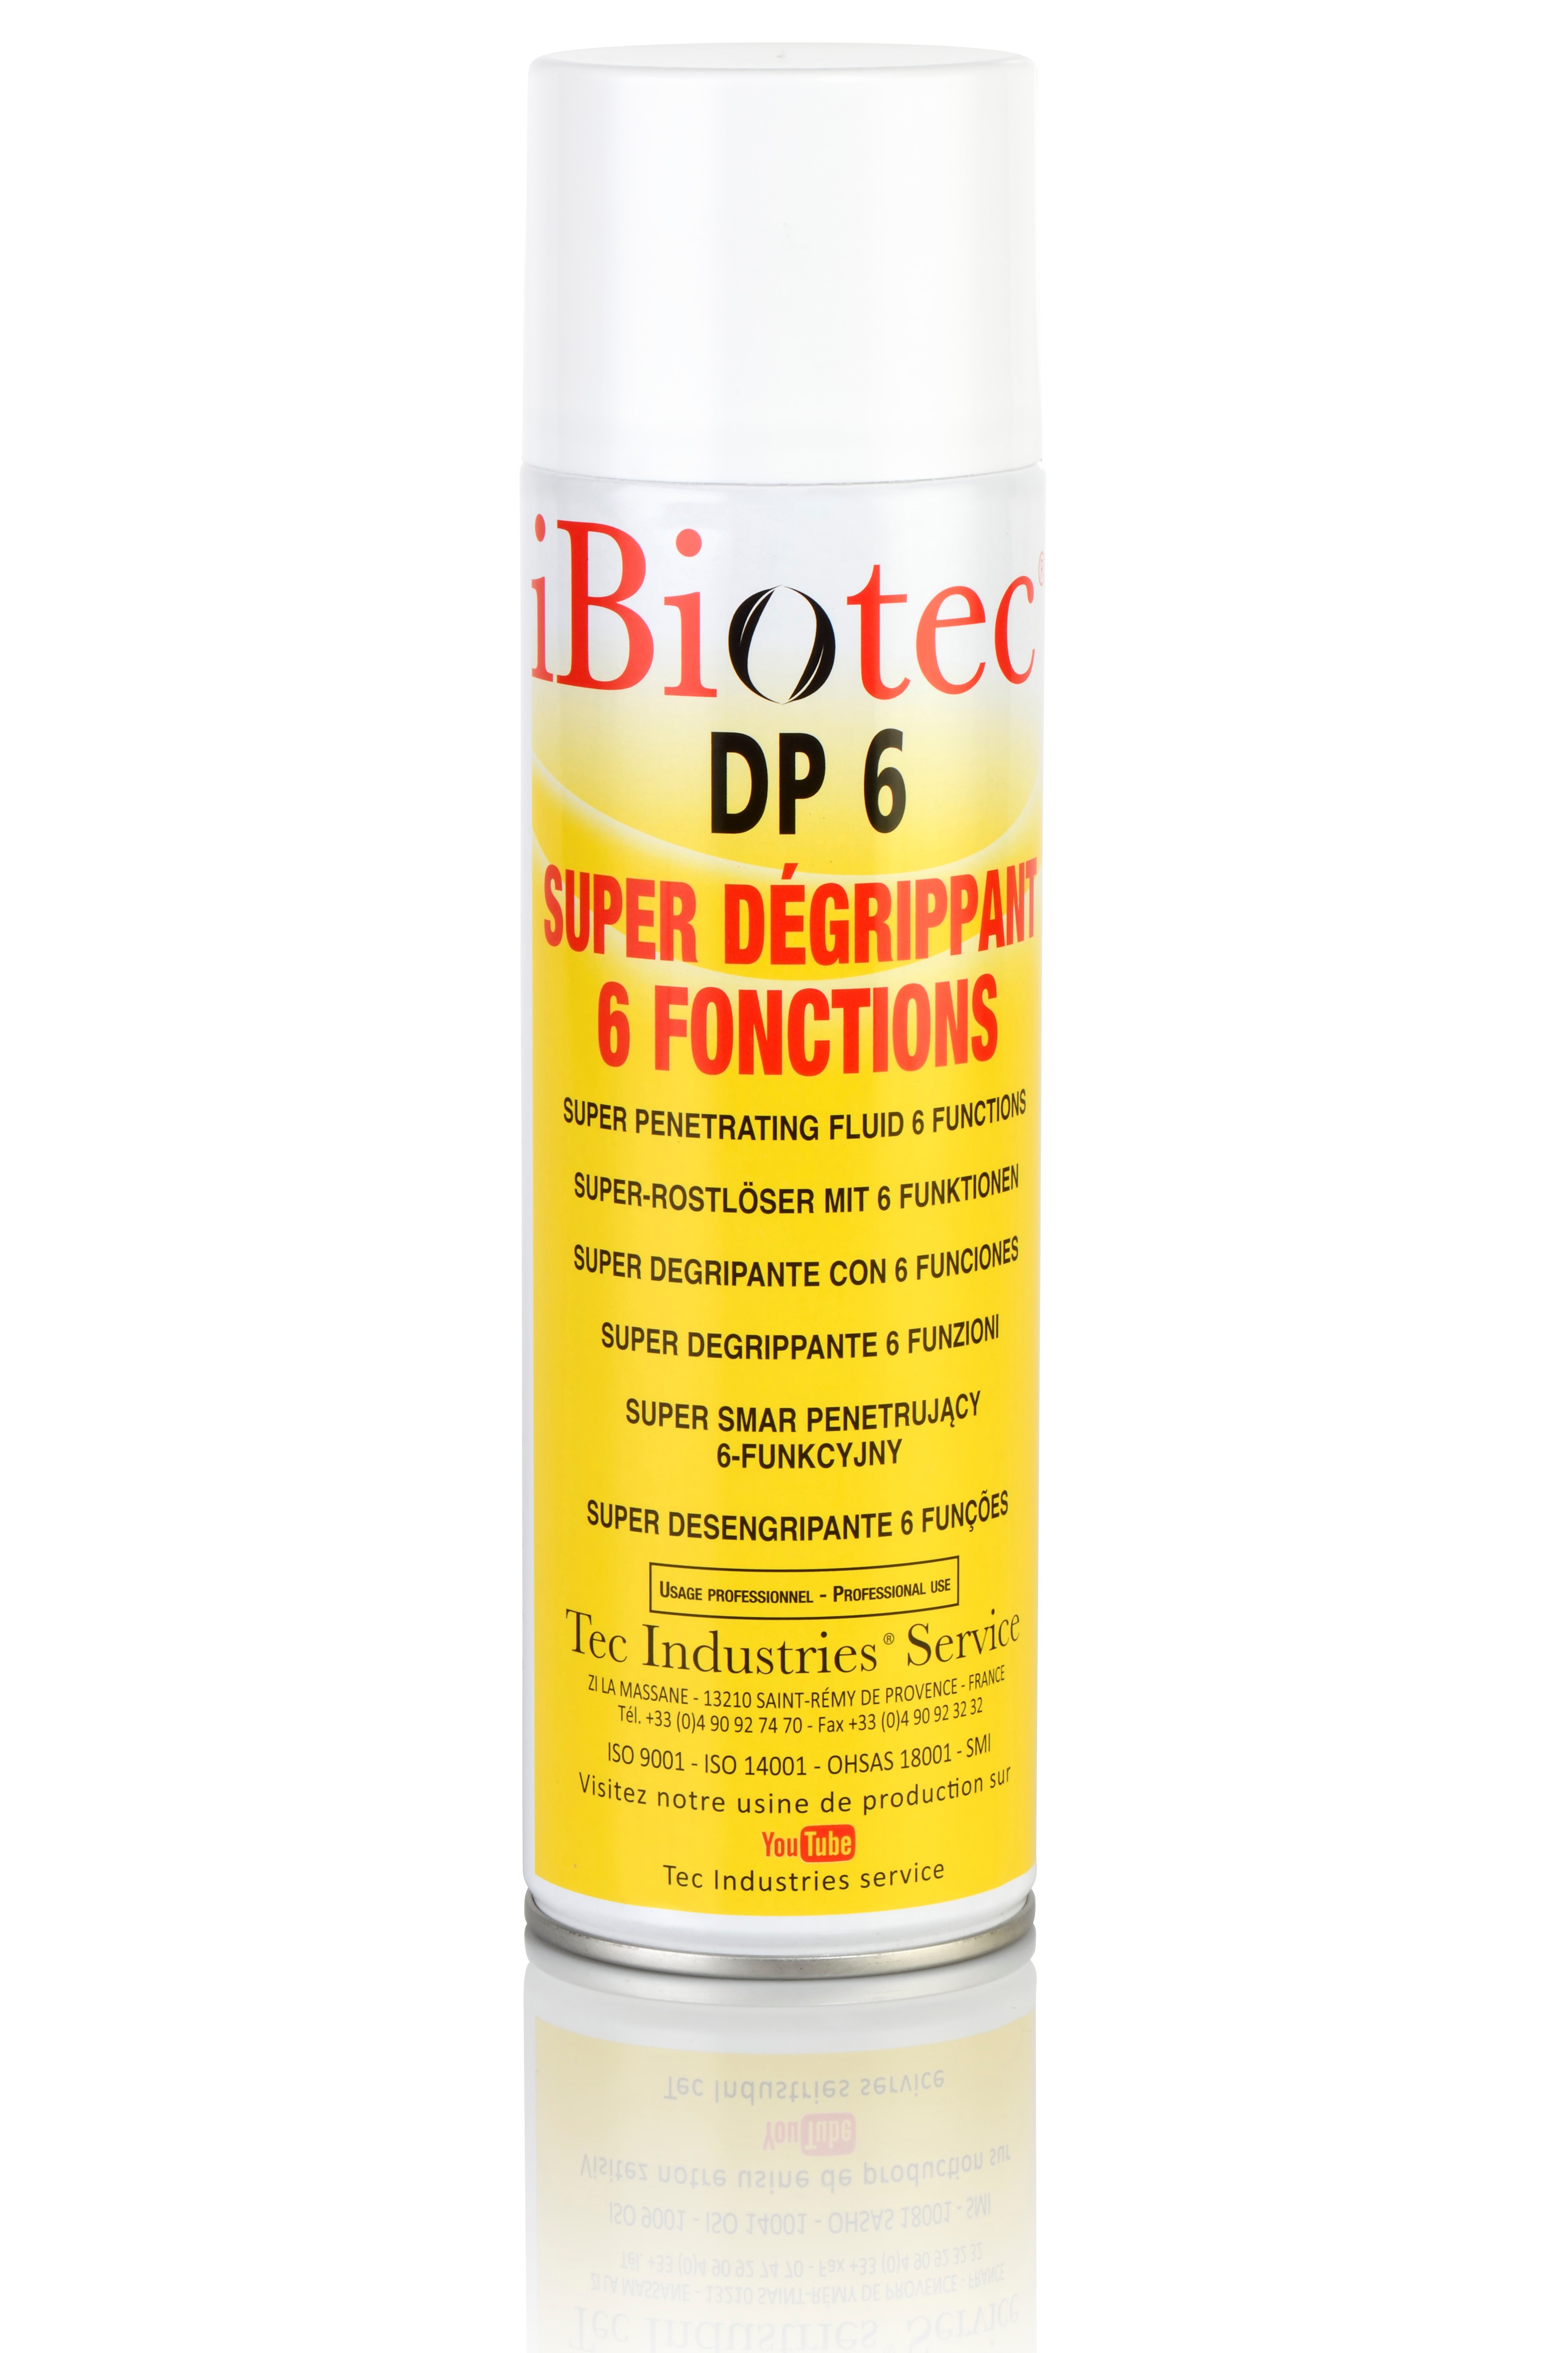 super powerful penetrating aerosol with quick deoxidising effect, high penetration, corrosion-resistant lubricant, wear resistant, cleanser, tar remover, six-function penetrating aerosol, non-flammable propellant, penetrating aerosol, penetrating aerosol for releasing seized parts, ibiotec super active penetrating aerosol, penetration deoxidation lubrication corrosion protection cleanser, deoxidising aerosol, penetrating aerosol for electrical contact